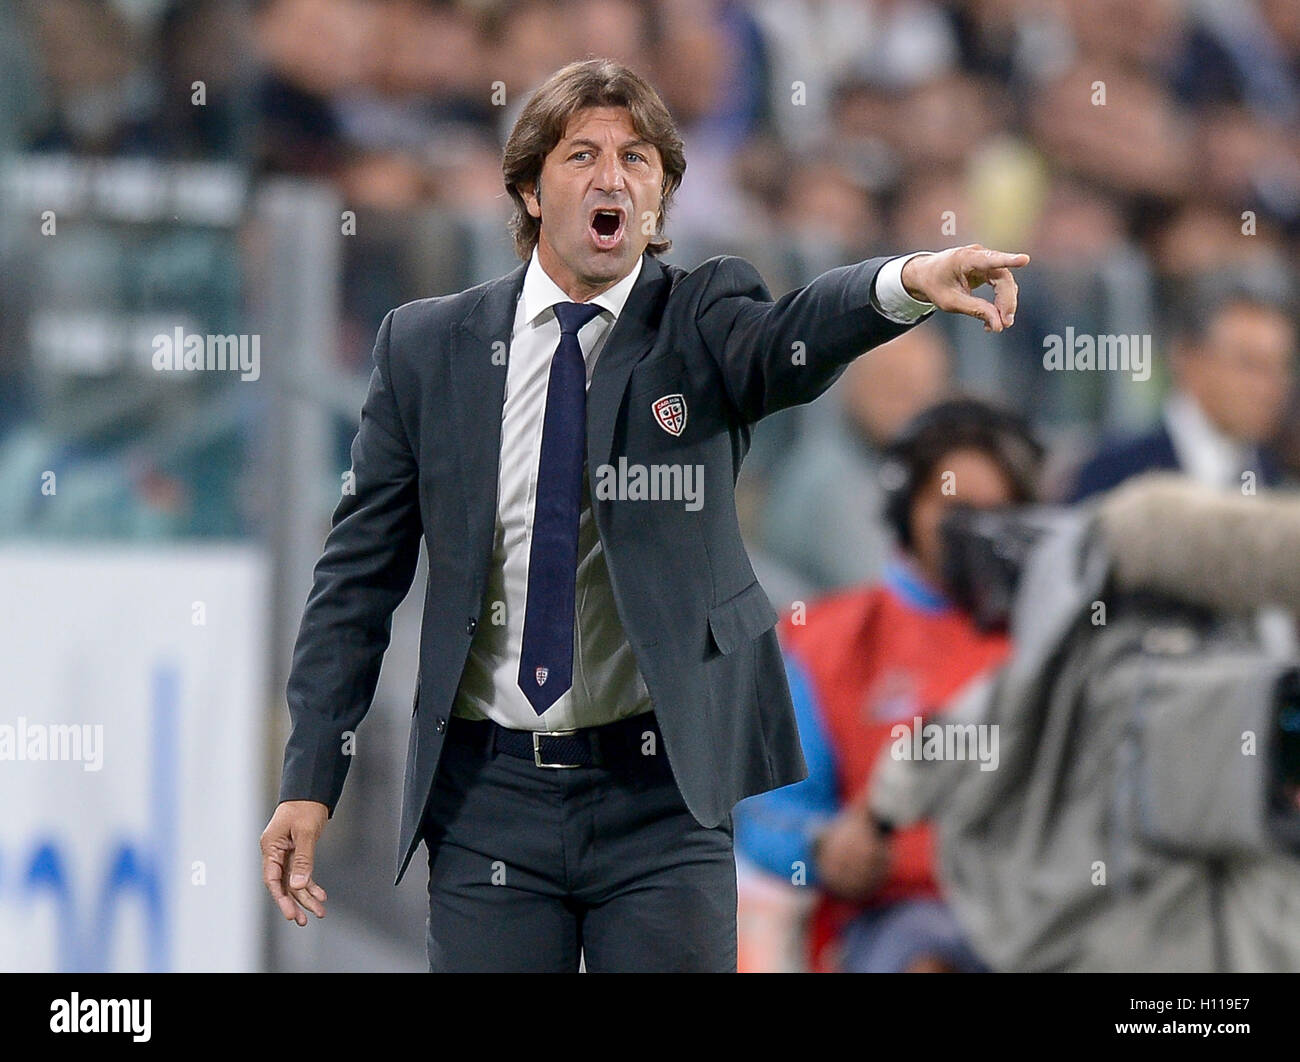 Turin, Italy. 21st Sep, 2016. Massimo Rastelli, head coach of Cagliari Calcio, gestures during the Serie A football match between Juventus FC and Cagliari Calcio. Juventus FC wins 4-0 over Cagliari Calcio. © Nicolò Campo/Pacific Press/Alamy Live News Stock Photo